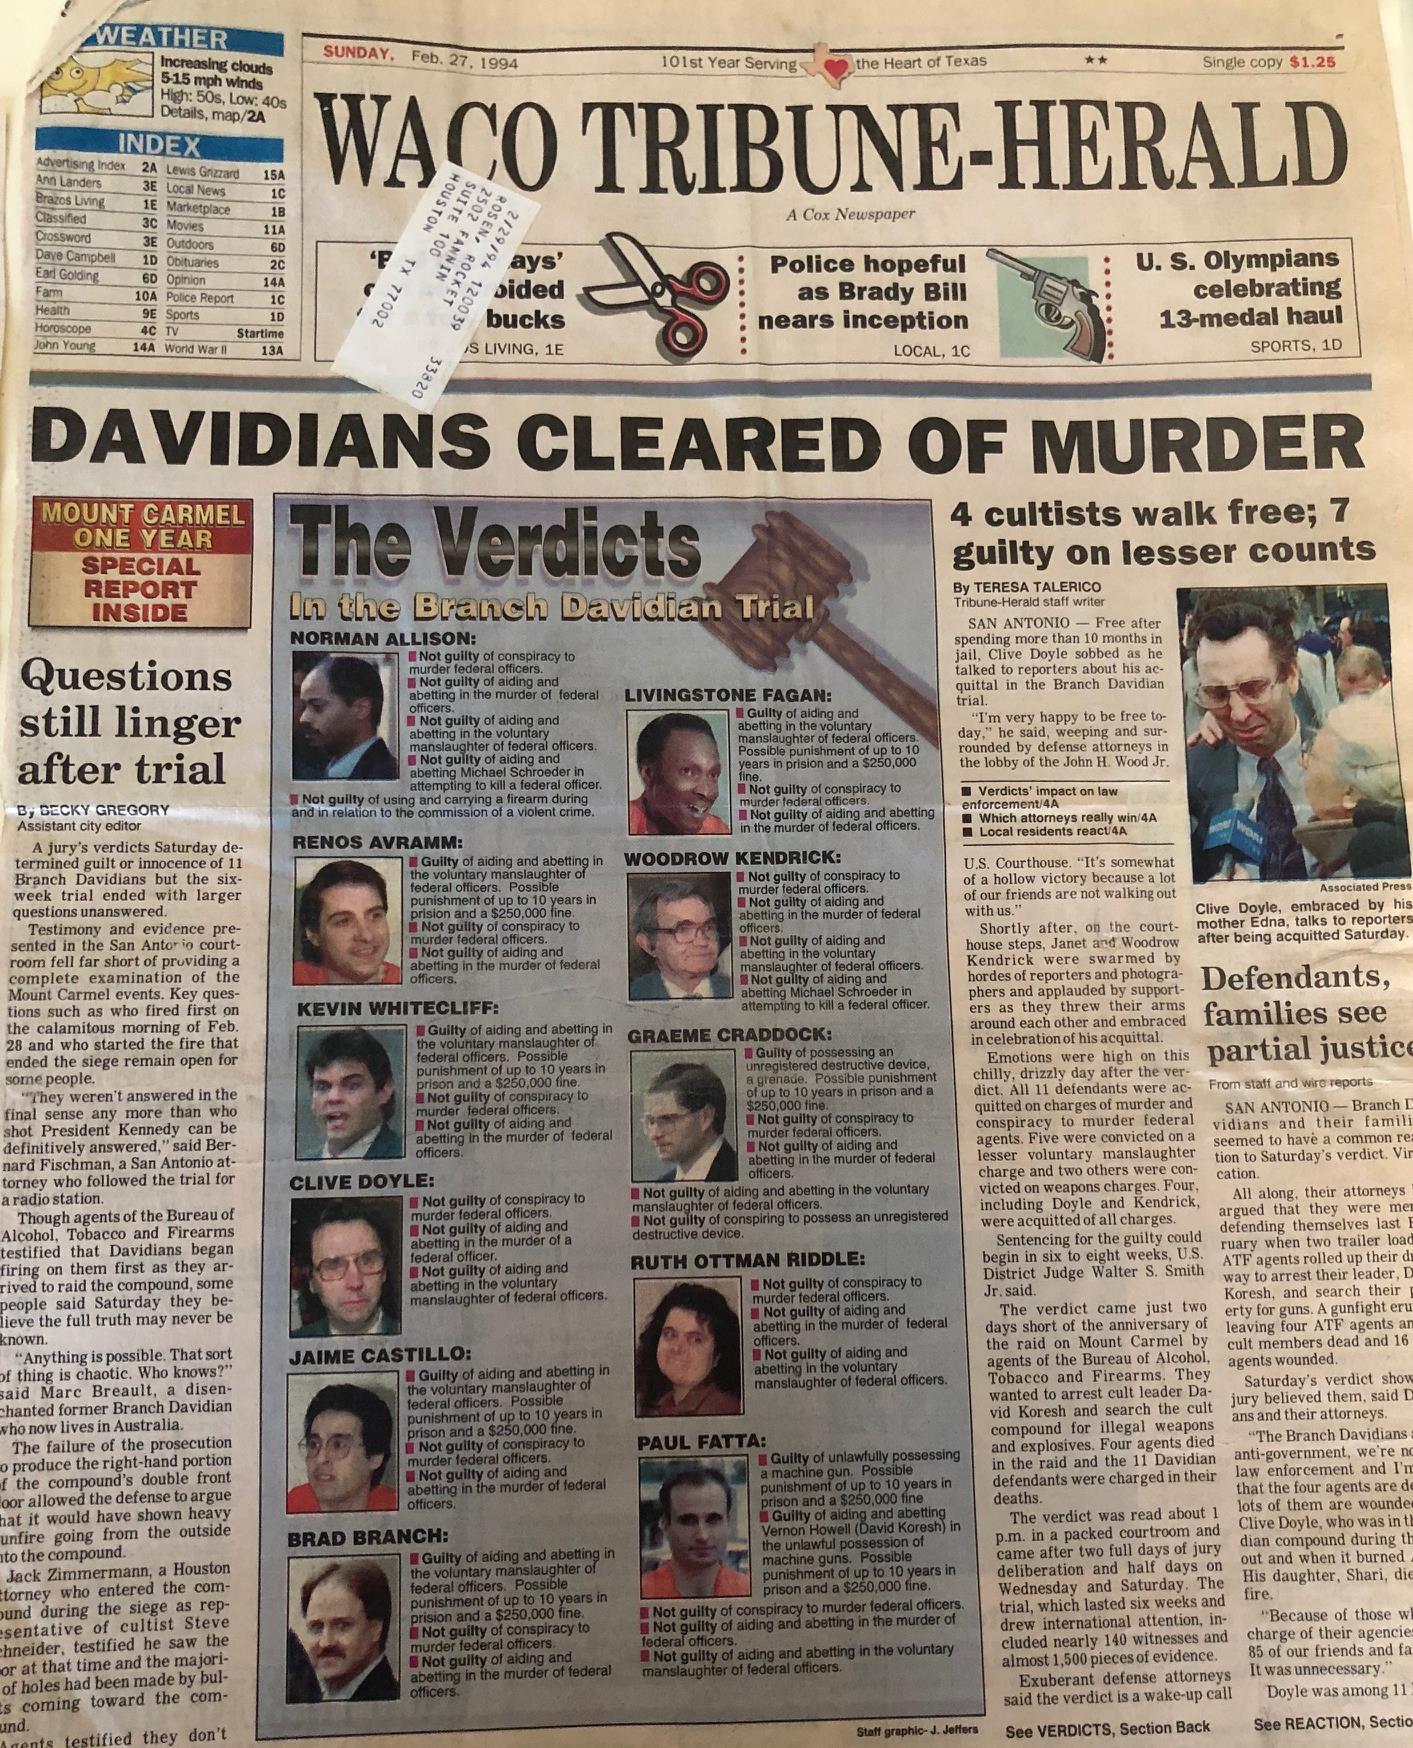 Davidians Cleared of Murder FrontPage News